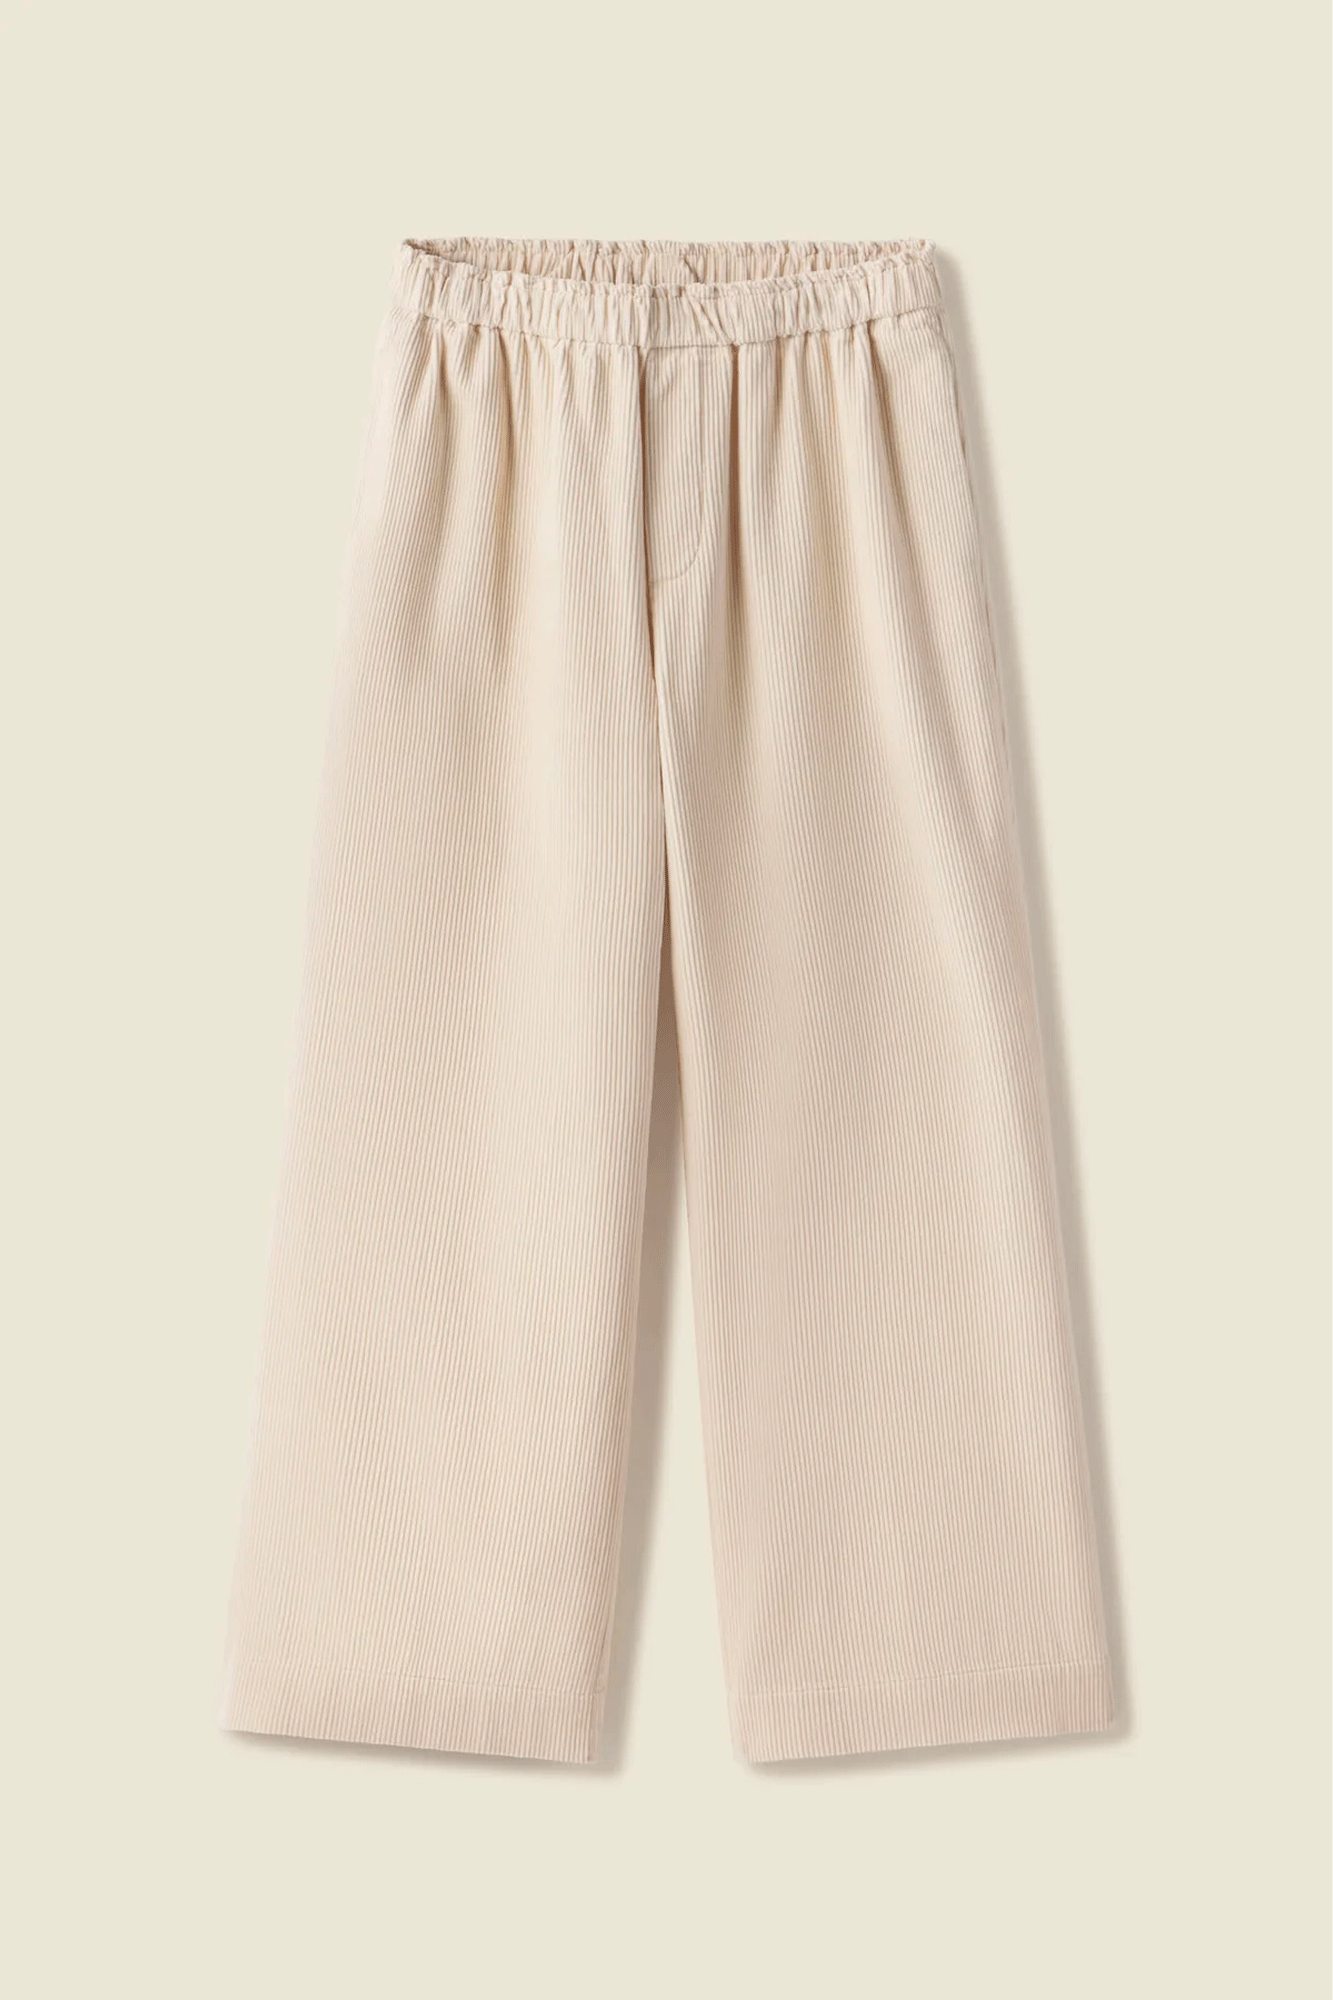 The Leona Pant from Trovata features a wide, soft elastic waistband and a bit of ruffle at the waist to complete any look. The straight-leg fit is made from 100% cotton for a comfortable, stylish finish. Additional details include a faux fly and two pockets in the side seams. A perfect choice for any occasion.